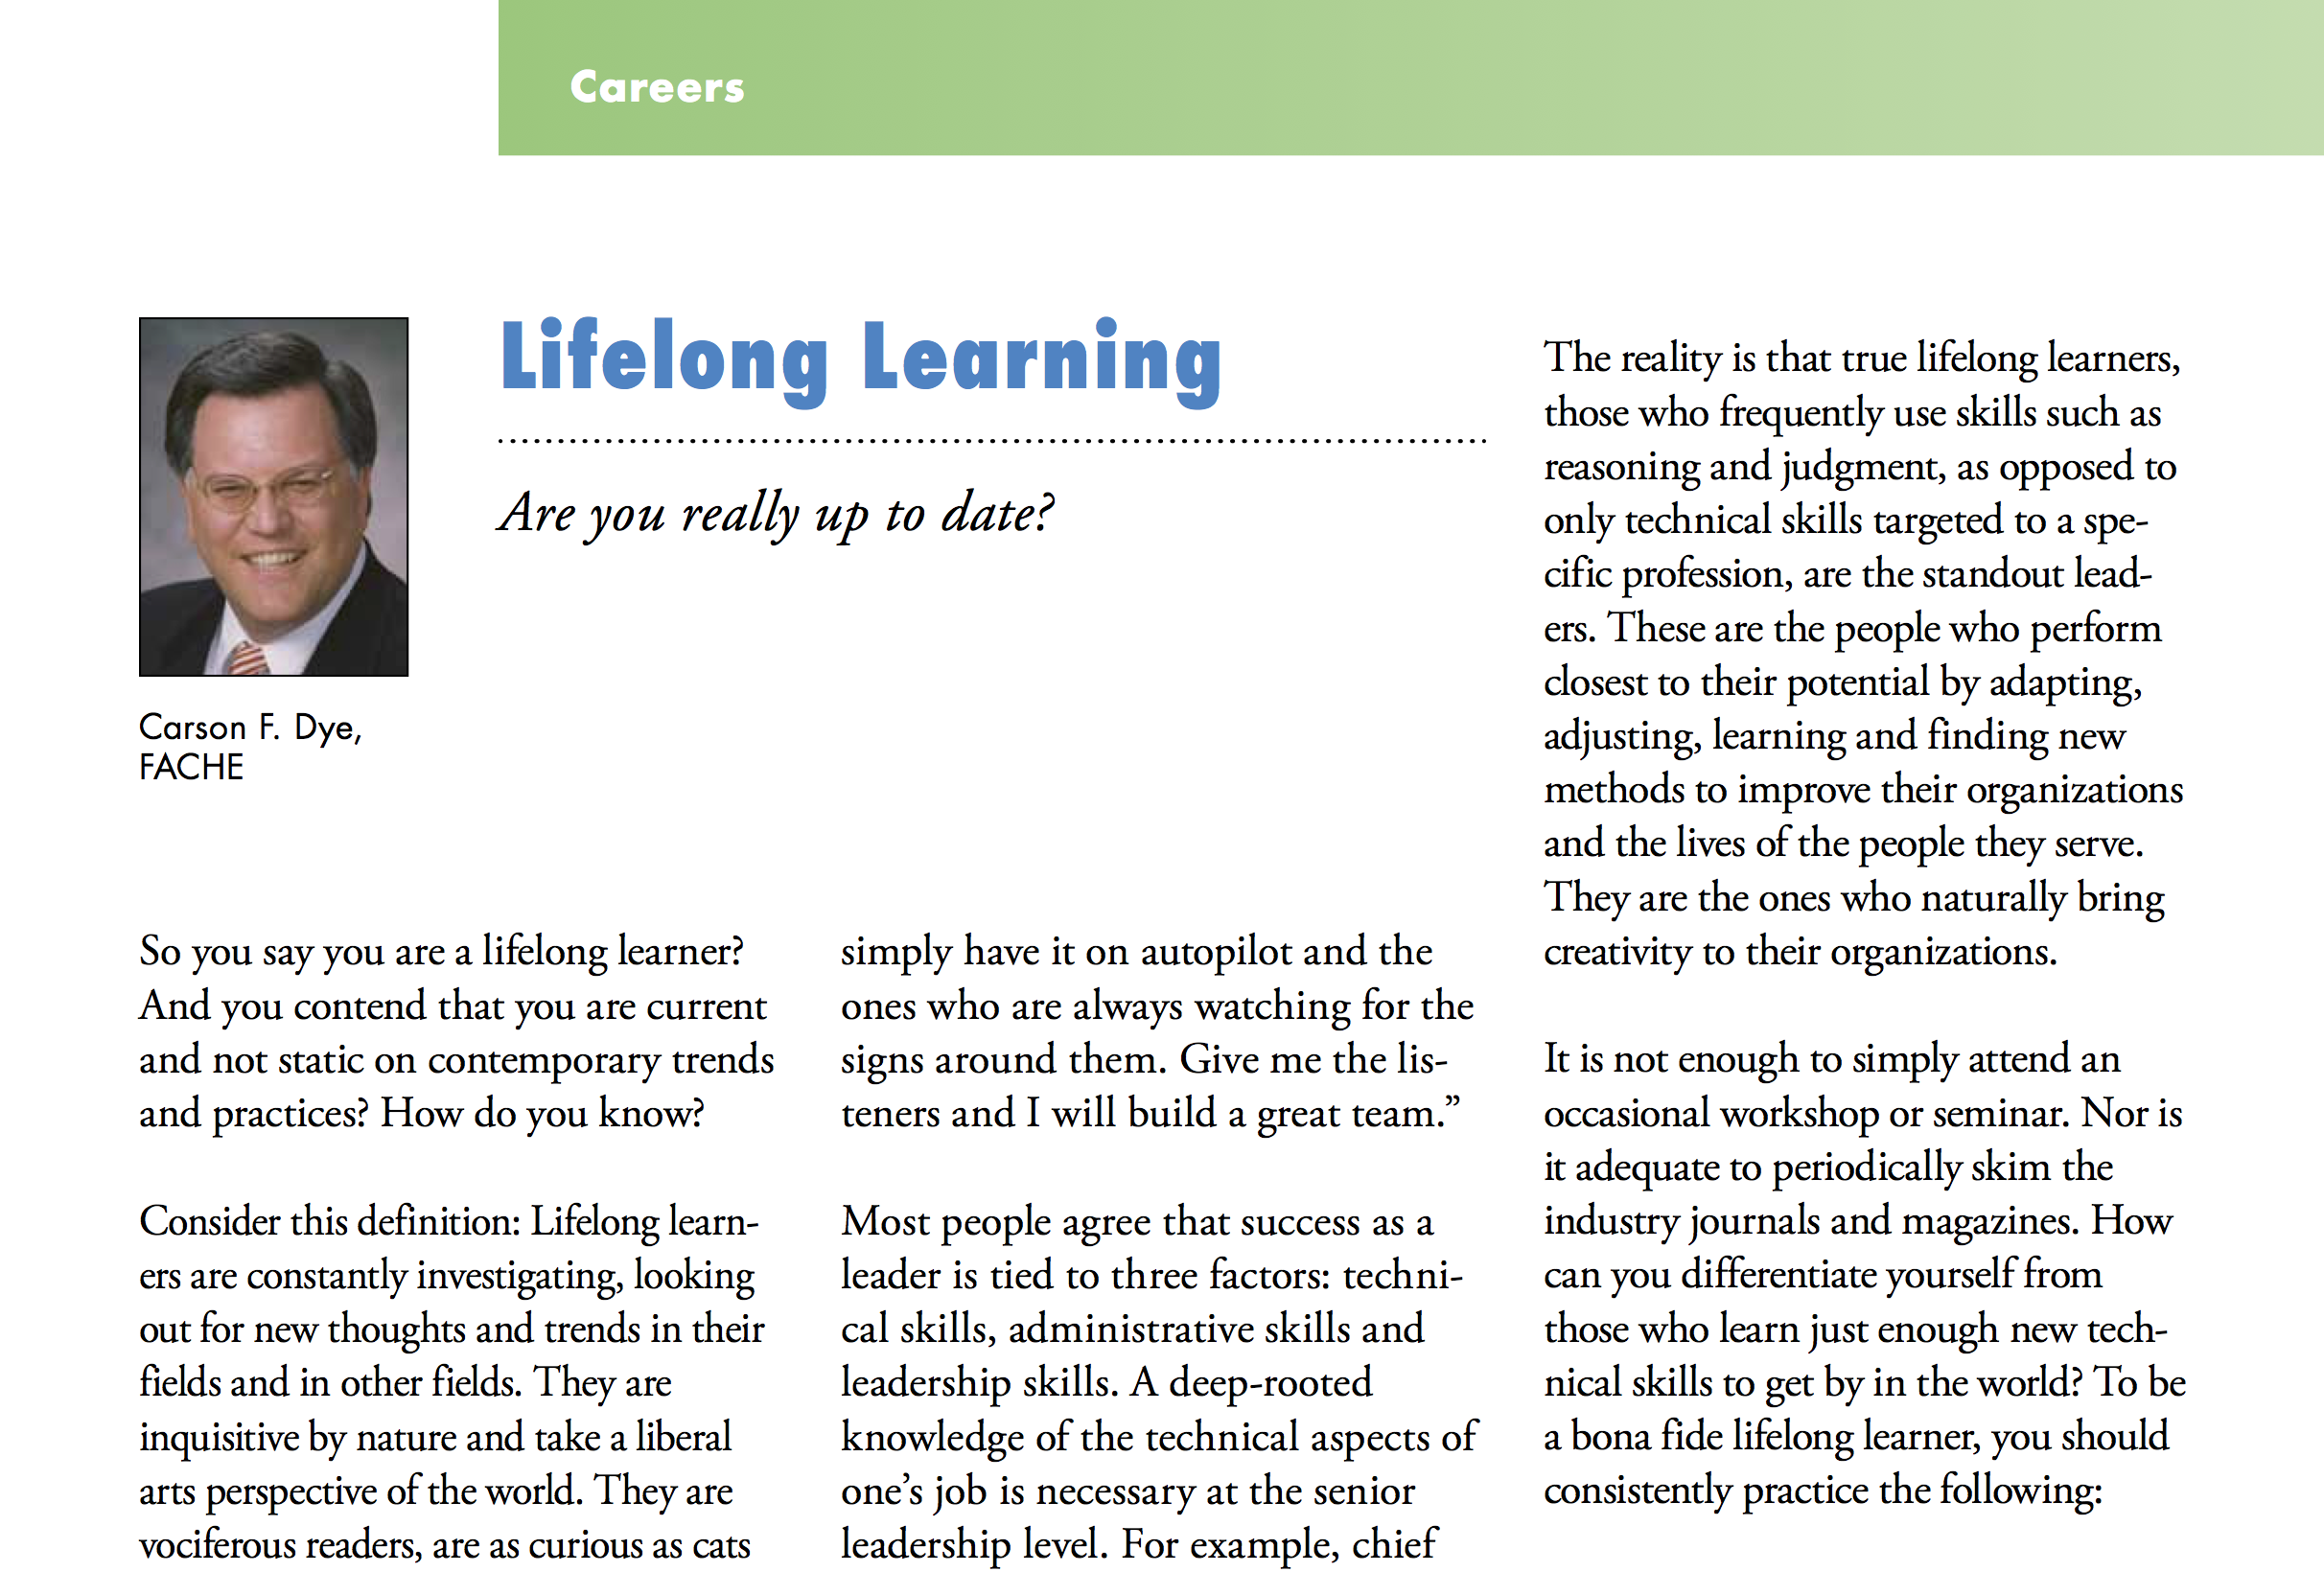 Reprinted from Healthcare Executive mar /apr 2010 - Lifelong Learning